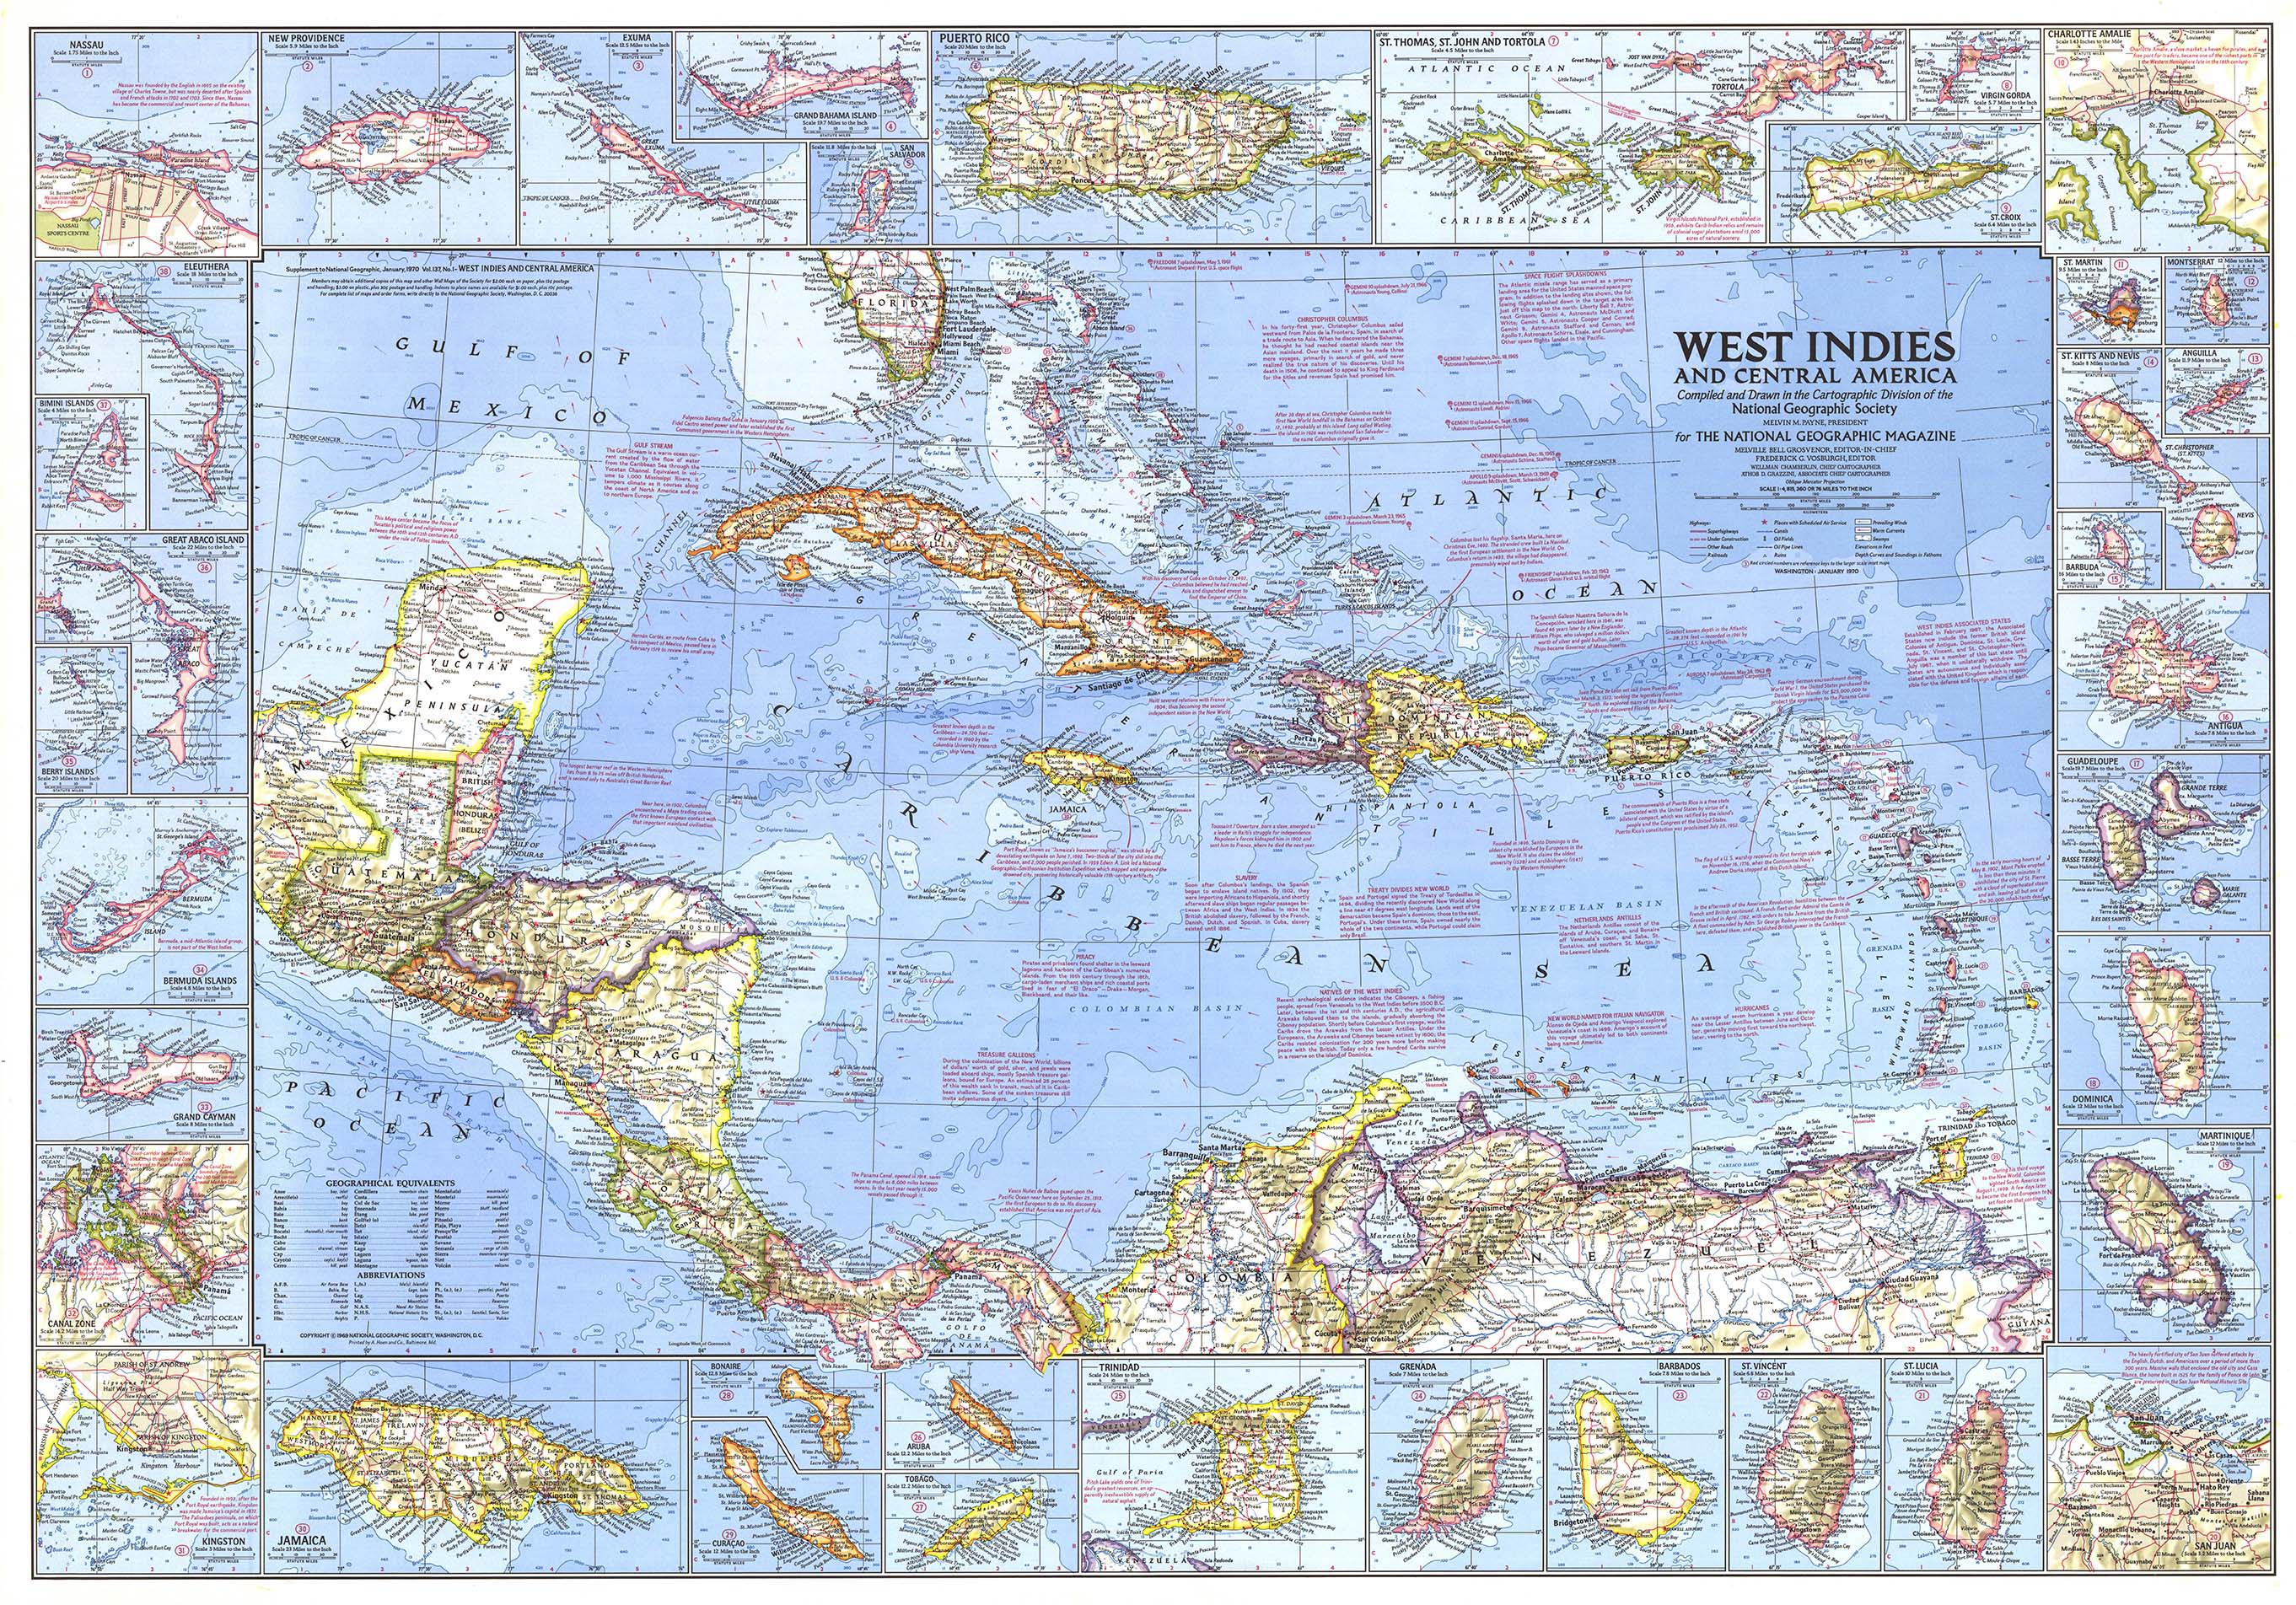 West Indies And Central America 1970 Wall Map By National Geographic 1819